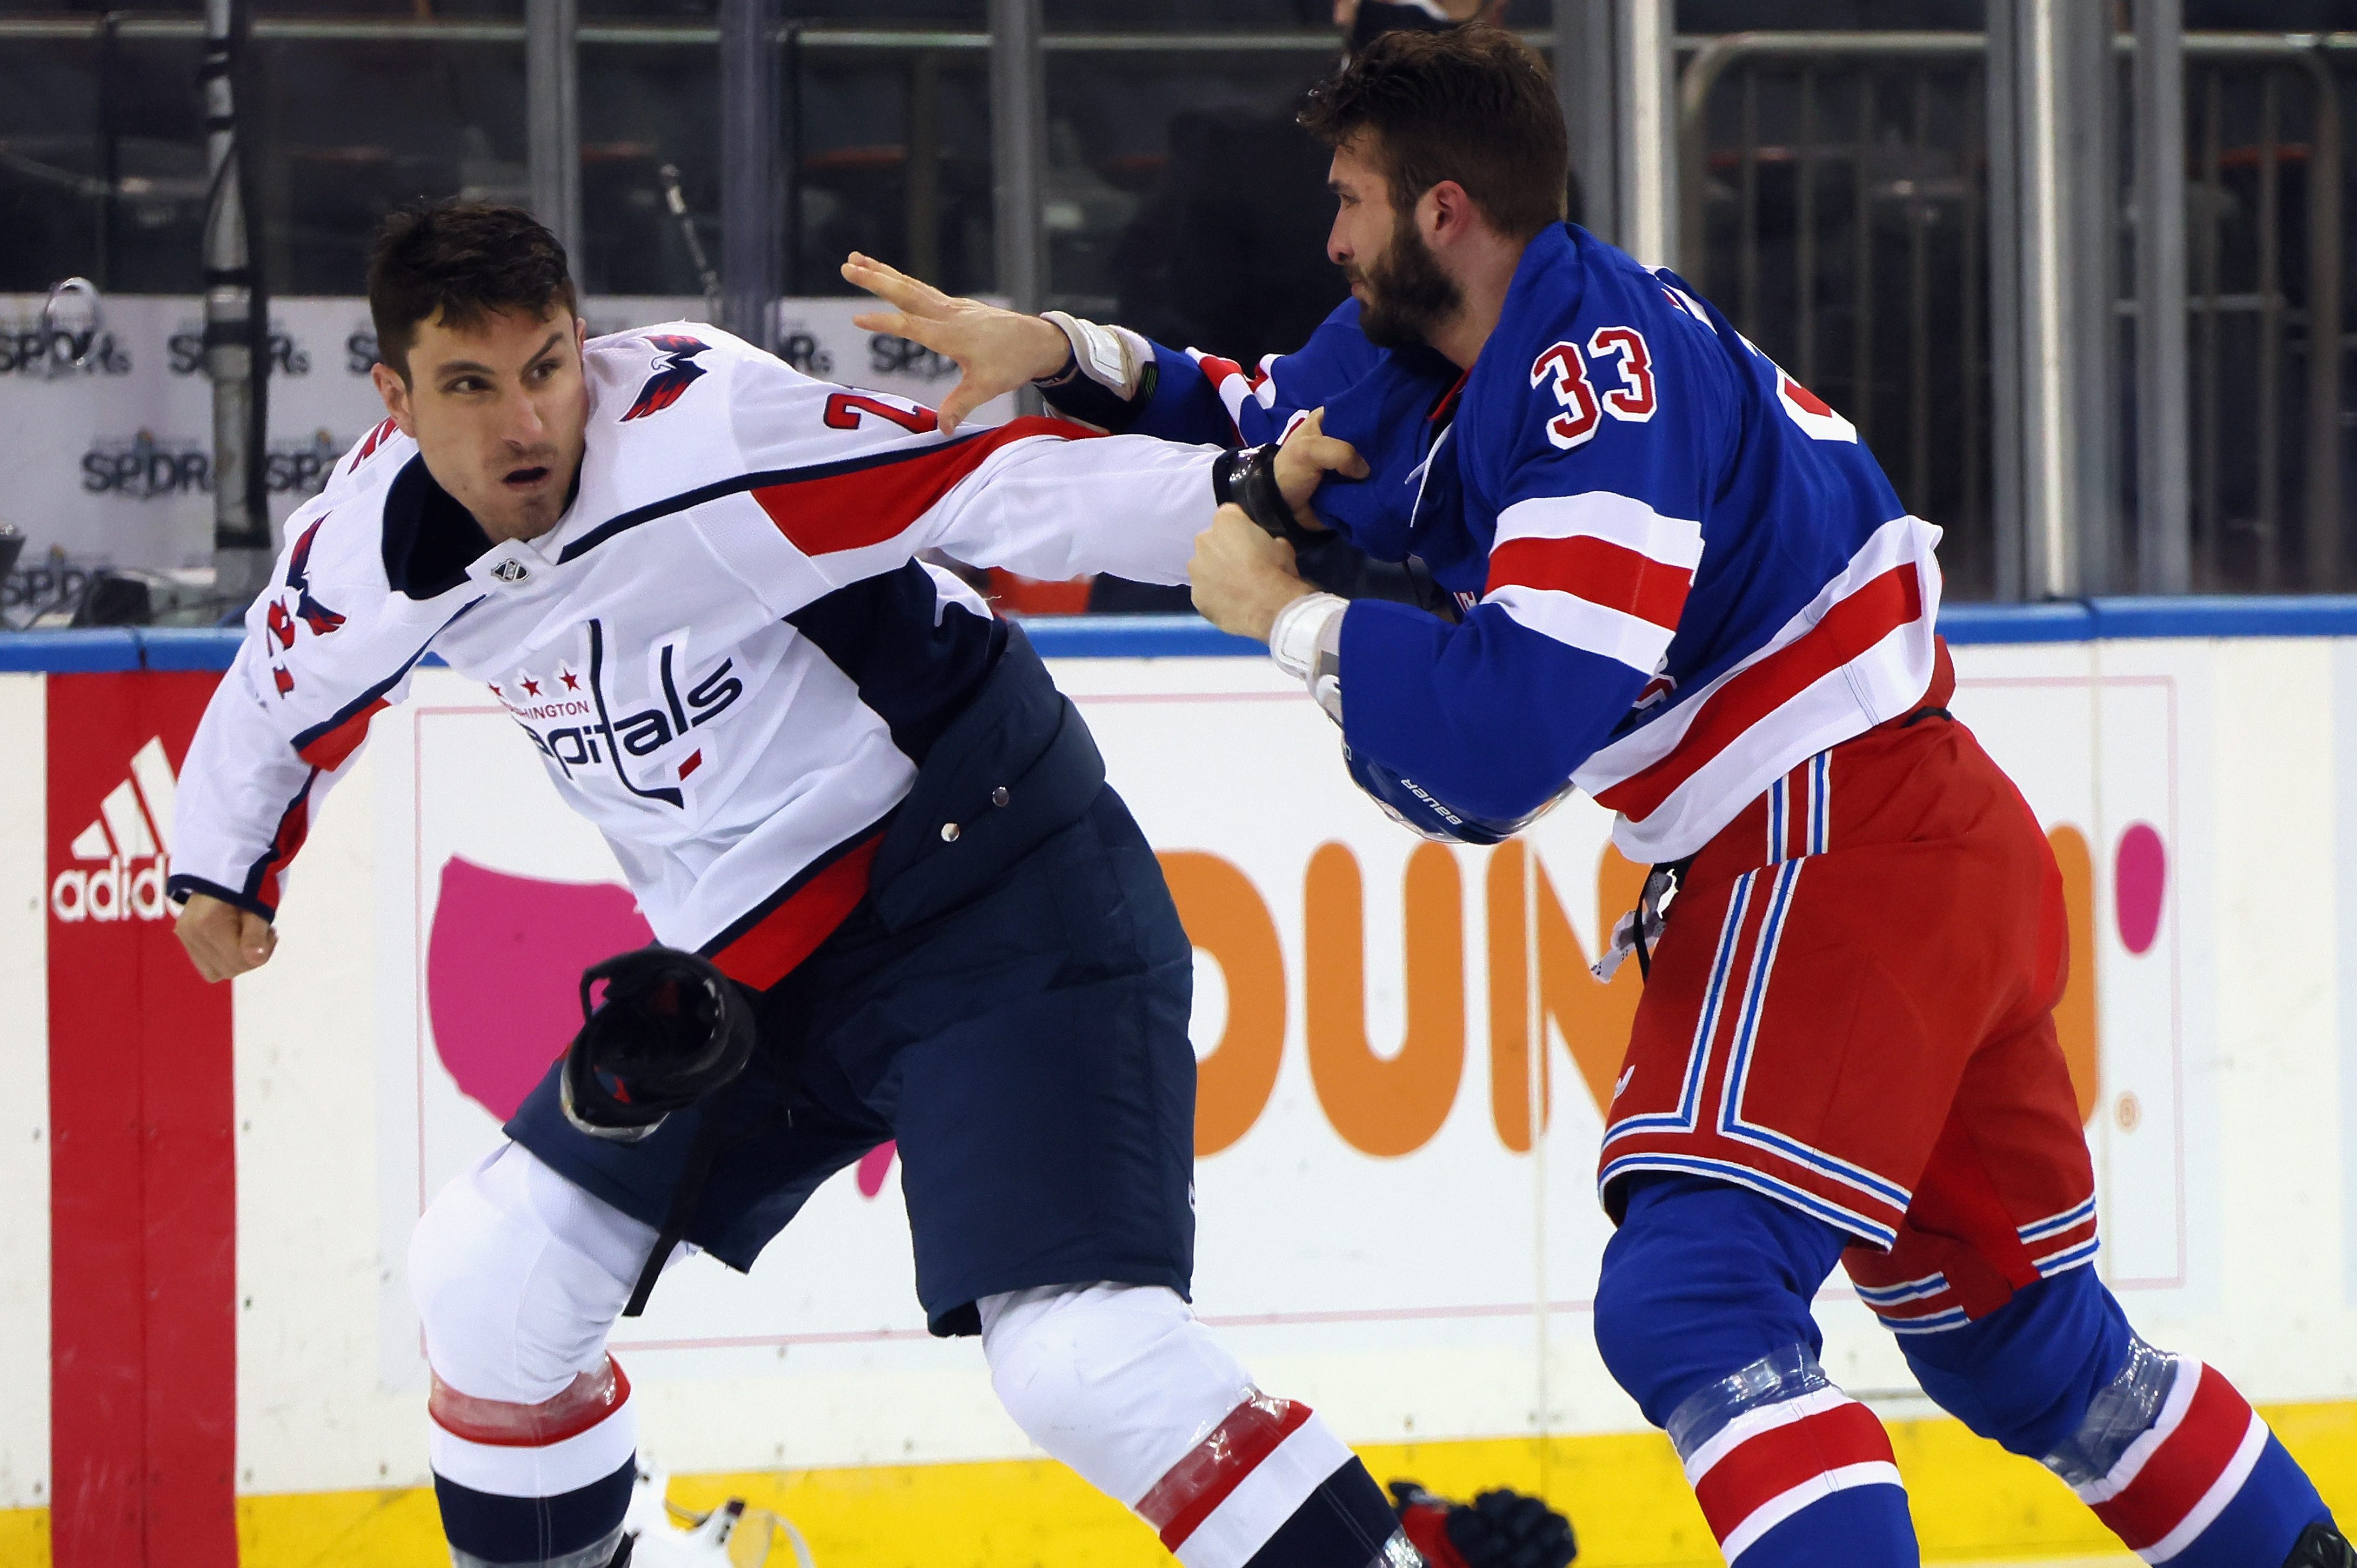 NHL Hockey Game Breaks Out in Slugfest Between Capitals and Rangers